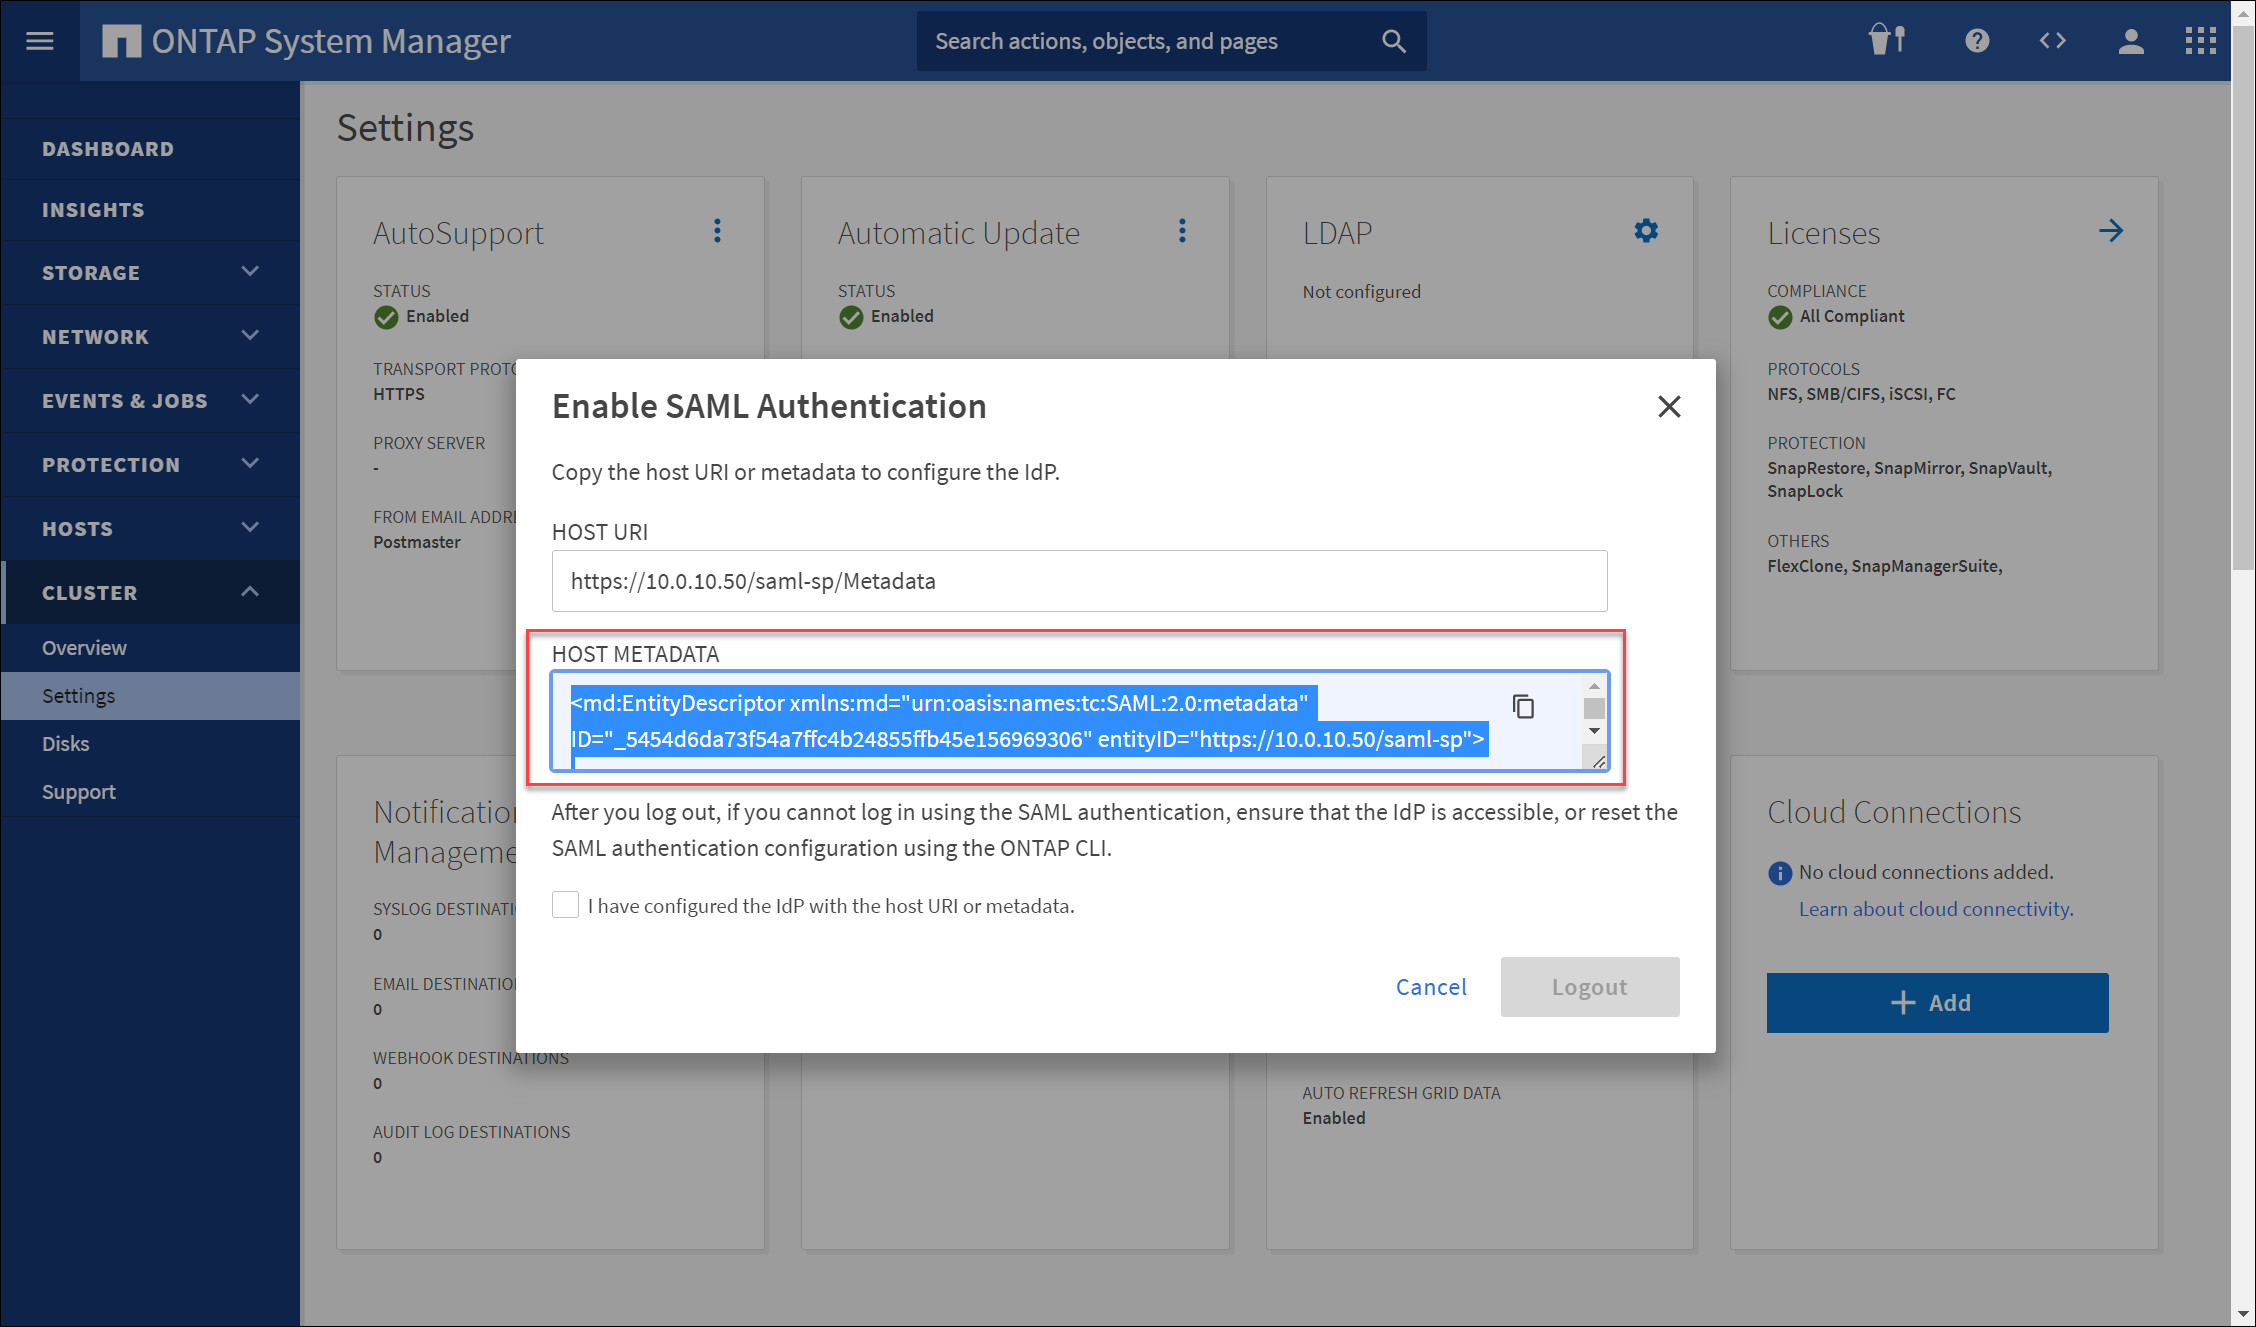 Screenshot of the NetApp ONTAP System Manager - Cluster Settings - SAML Authentication - Enable SAML Authentication Metadata UI